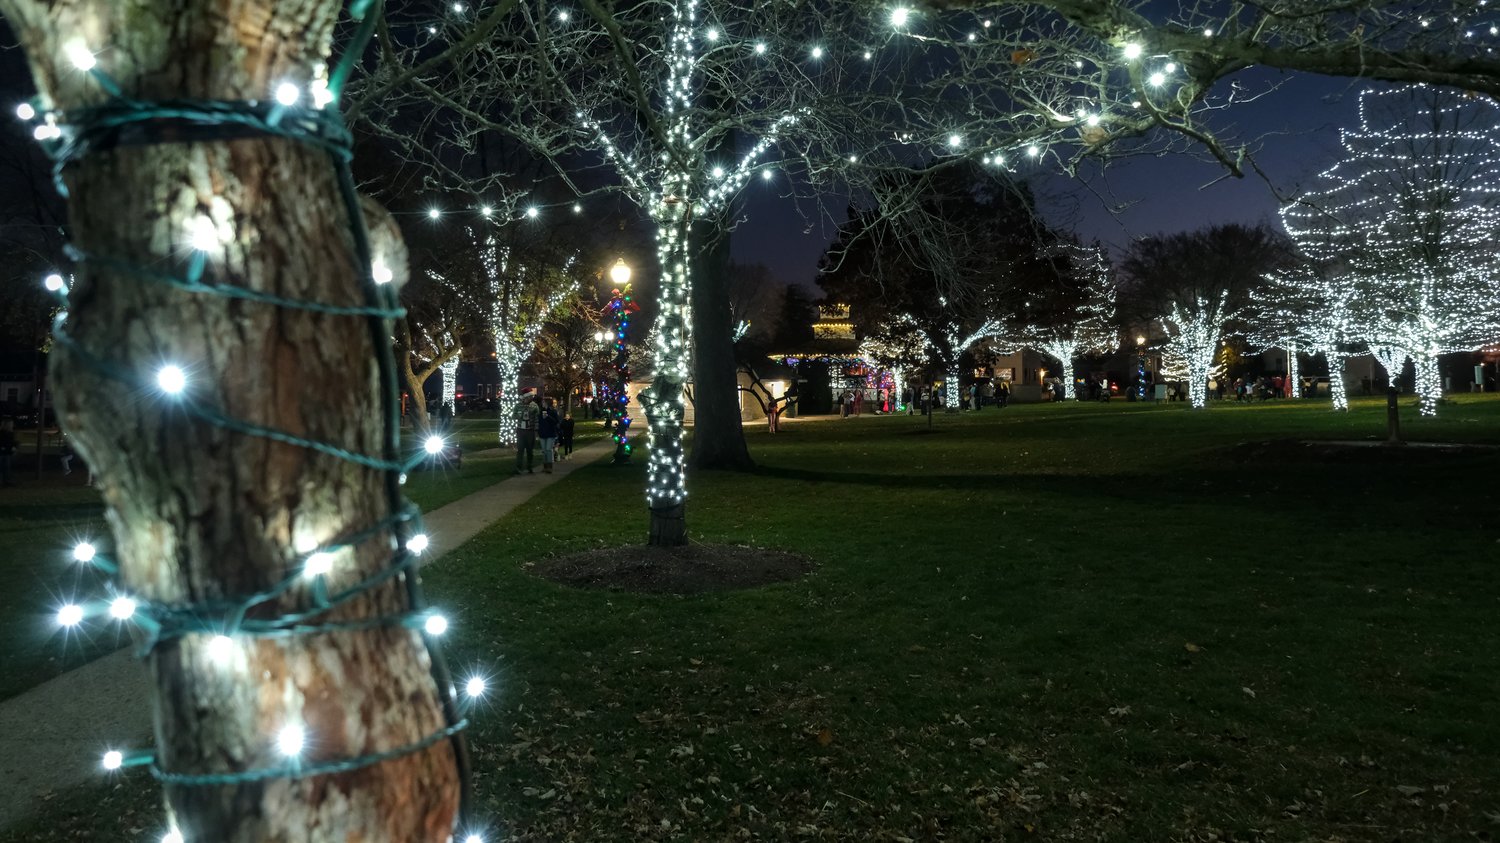 Walkway and lawn of the park with lighted trees.